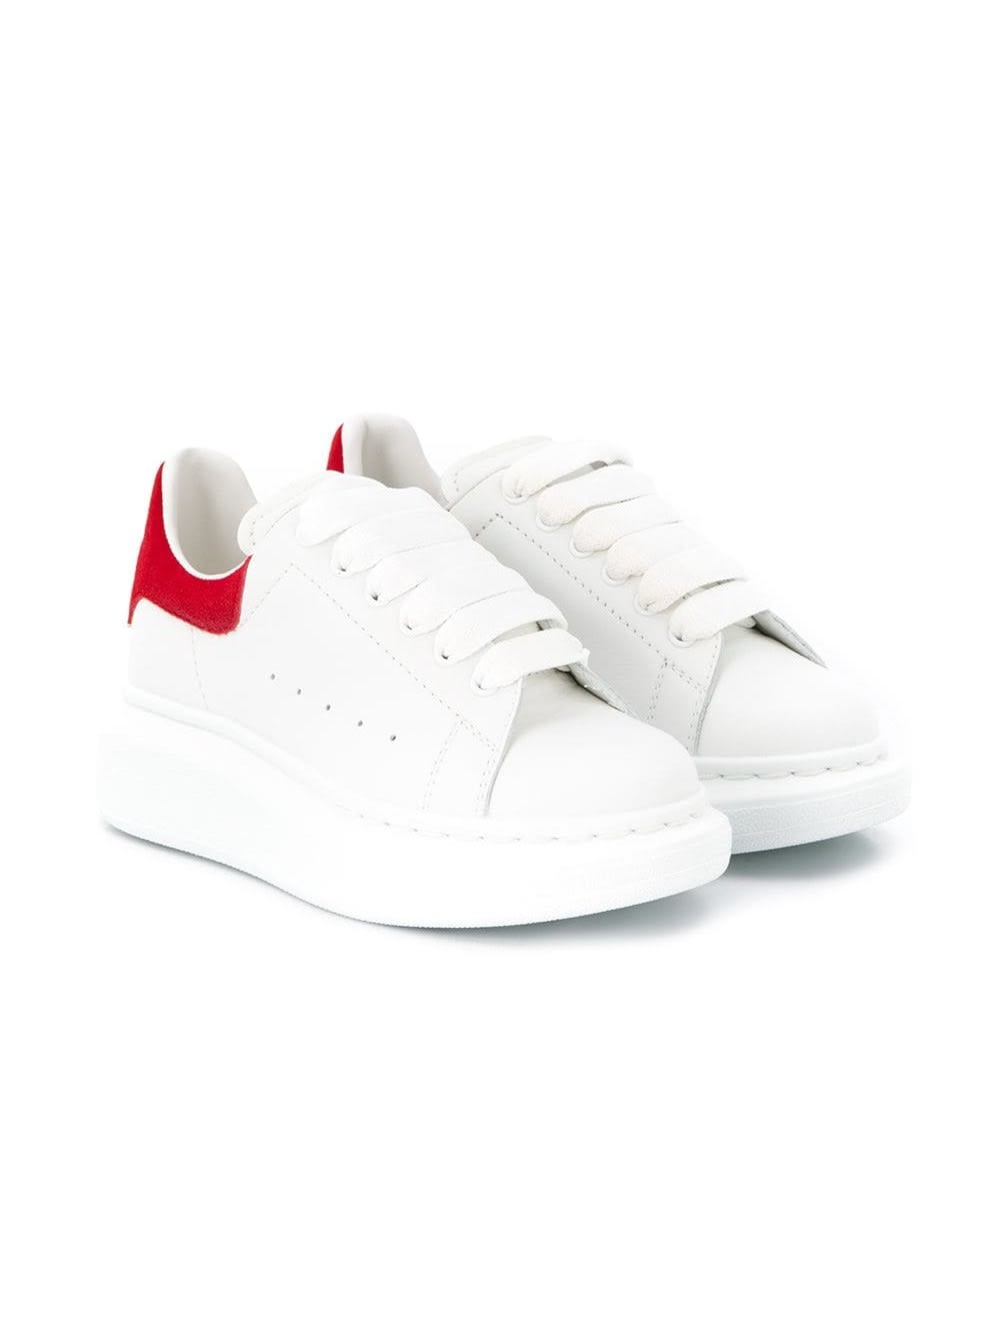 Alexander McQueen White Leather Oversize Sneakers With Red Heel Tab